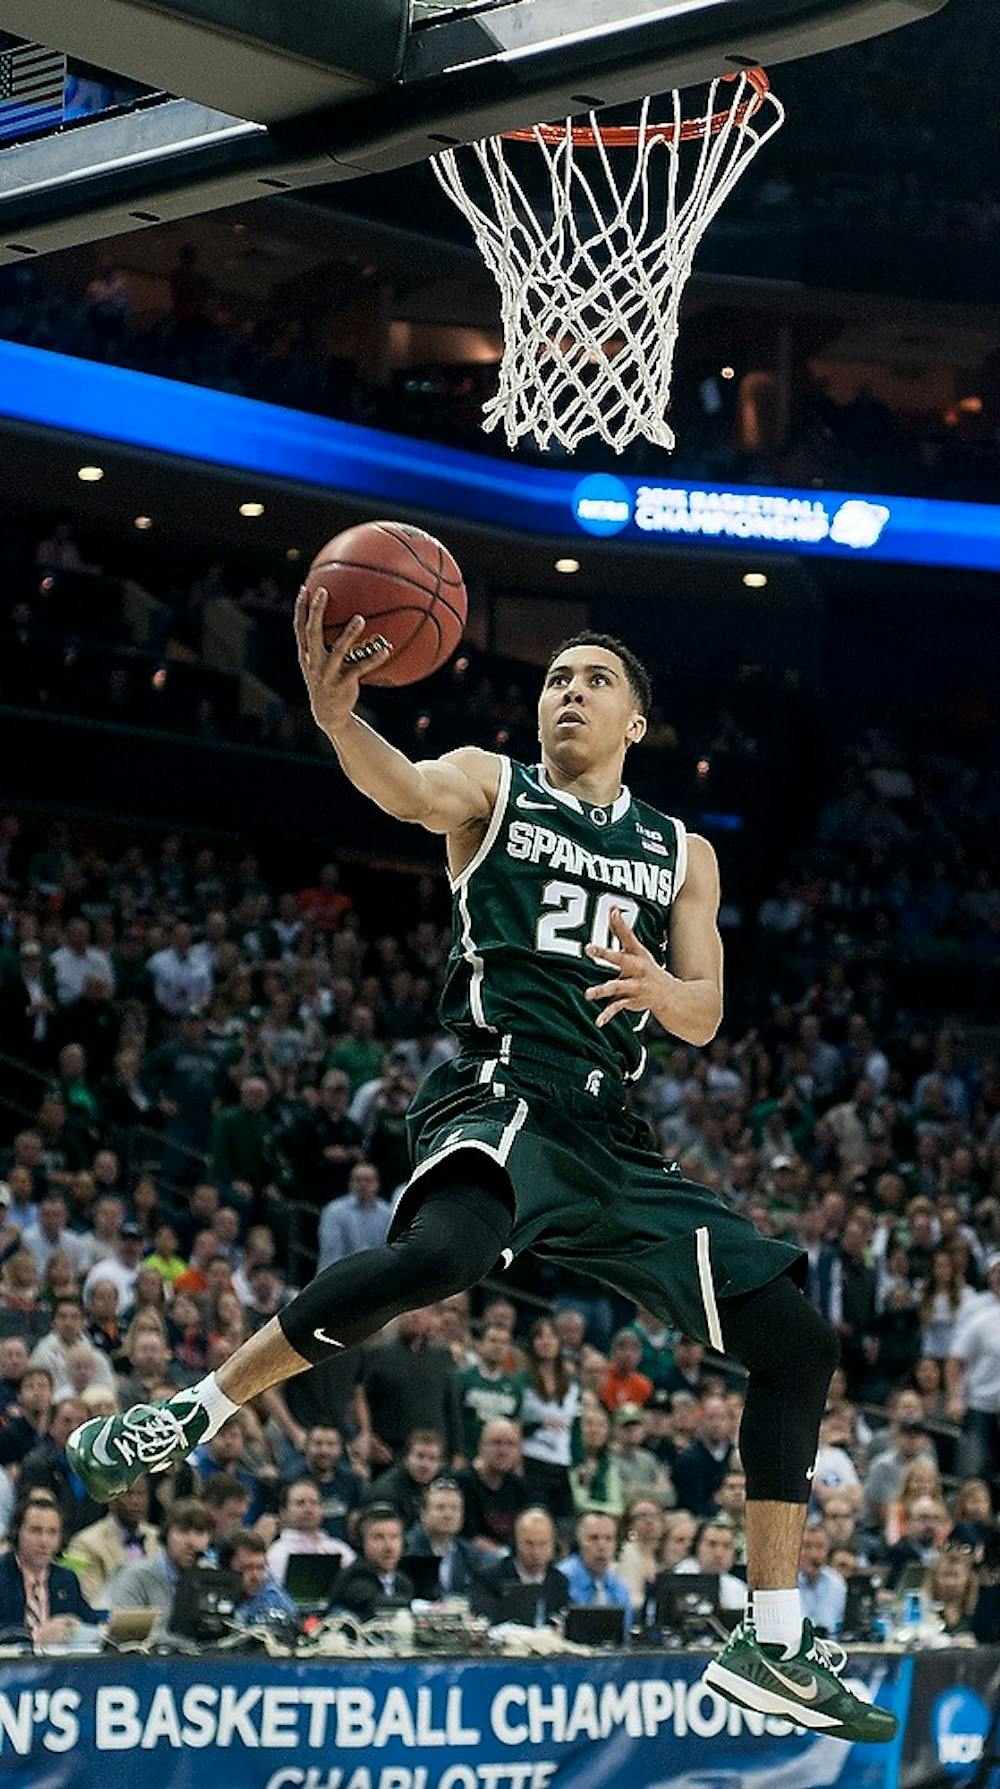 <p>Senior guard Travis Trice shoots Mar. 22, 2015, during the game against Virginia in the Round of 32 of the NCAA tournament at the Time Warner Cable Arena in Charlotte, NC. The Spartans defeated the Cavaliers 60-54. Alice Kole/The State News</p>